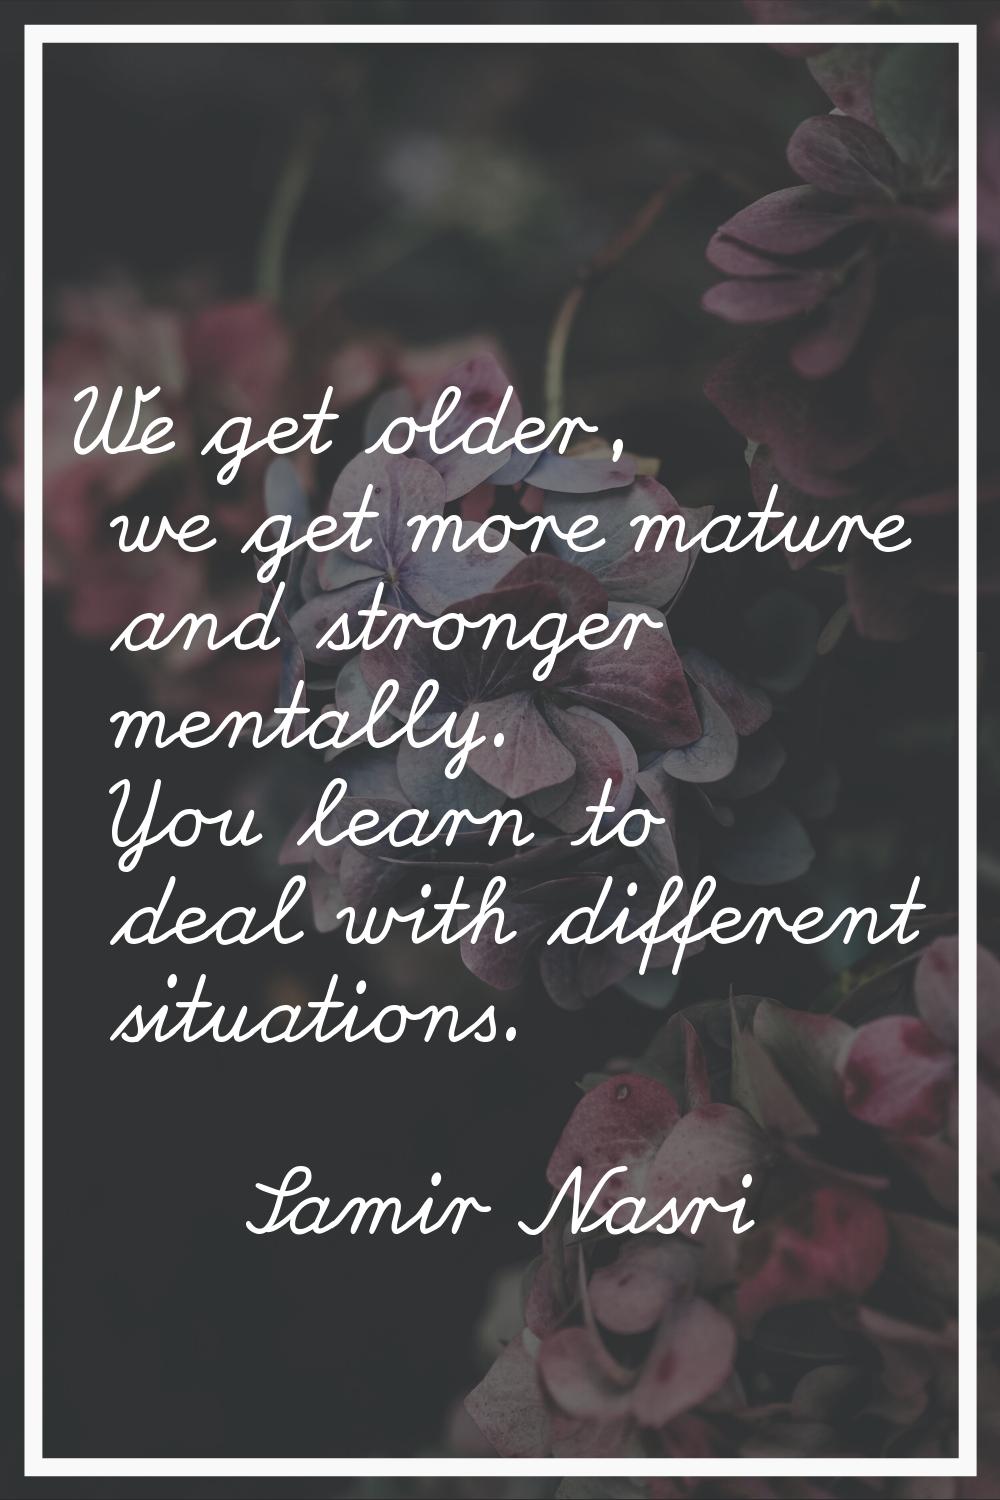 We get older, we get more mature and stronger mentally. You learn to deal with different situations